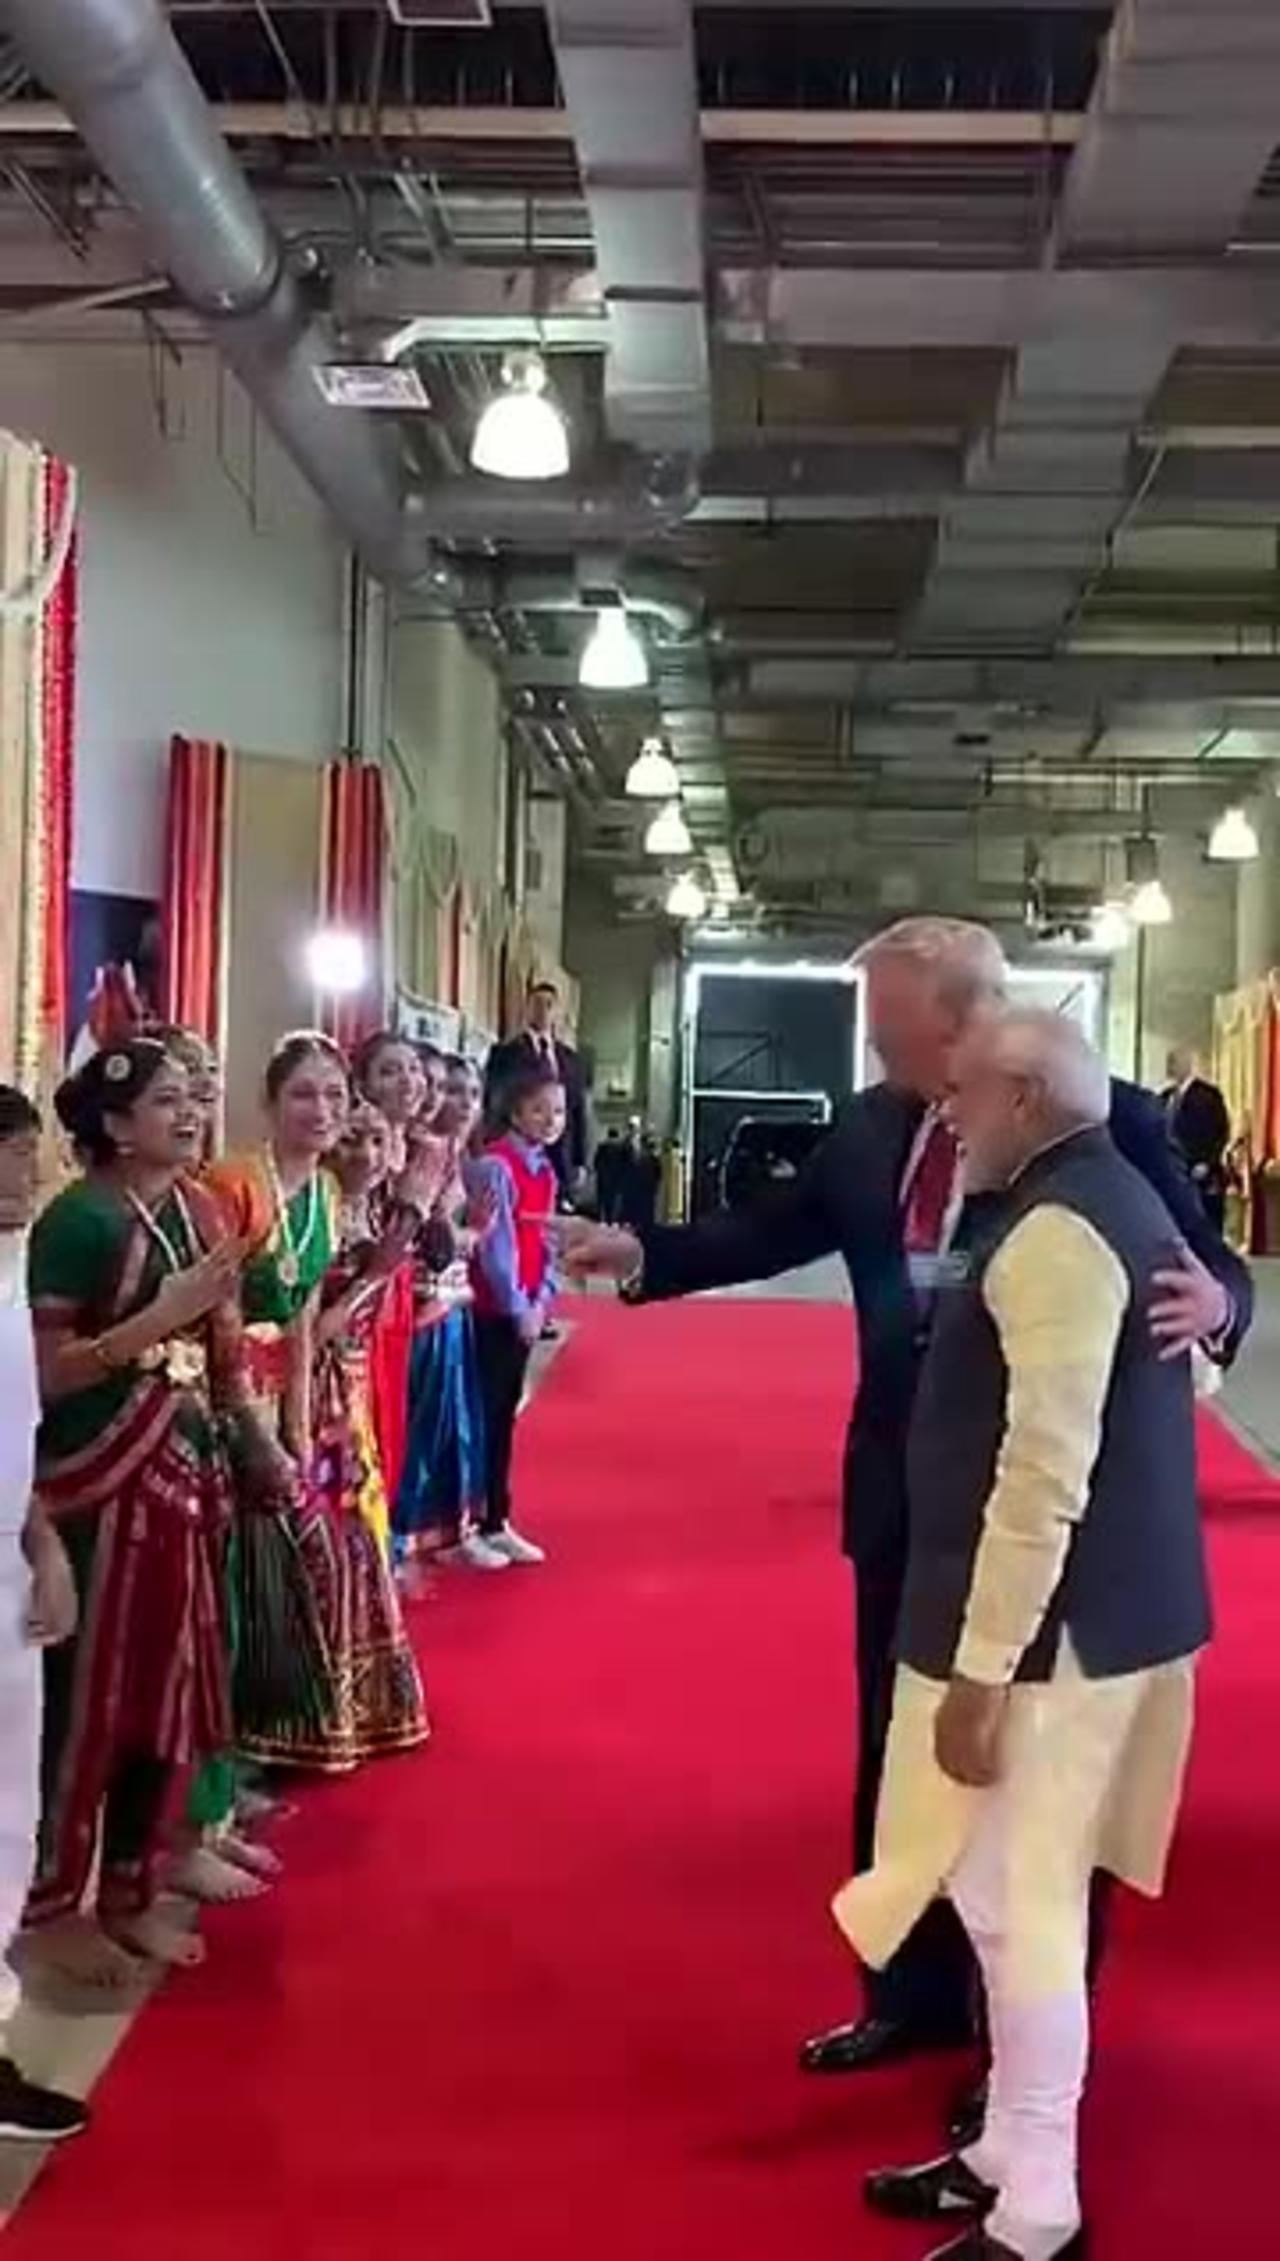 PM Modi & President Trump Interacted With a Group of Youngsters at During #HowdyModi event